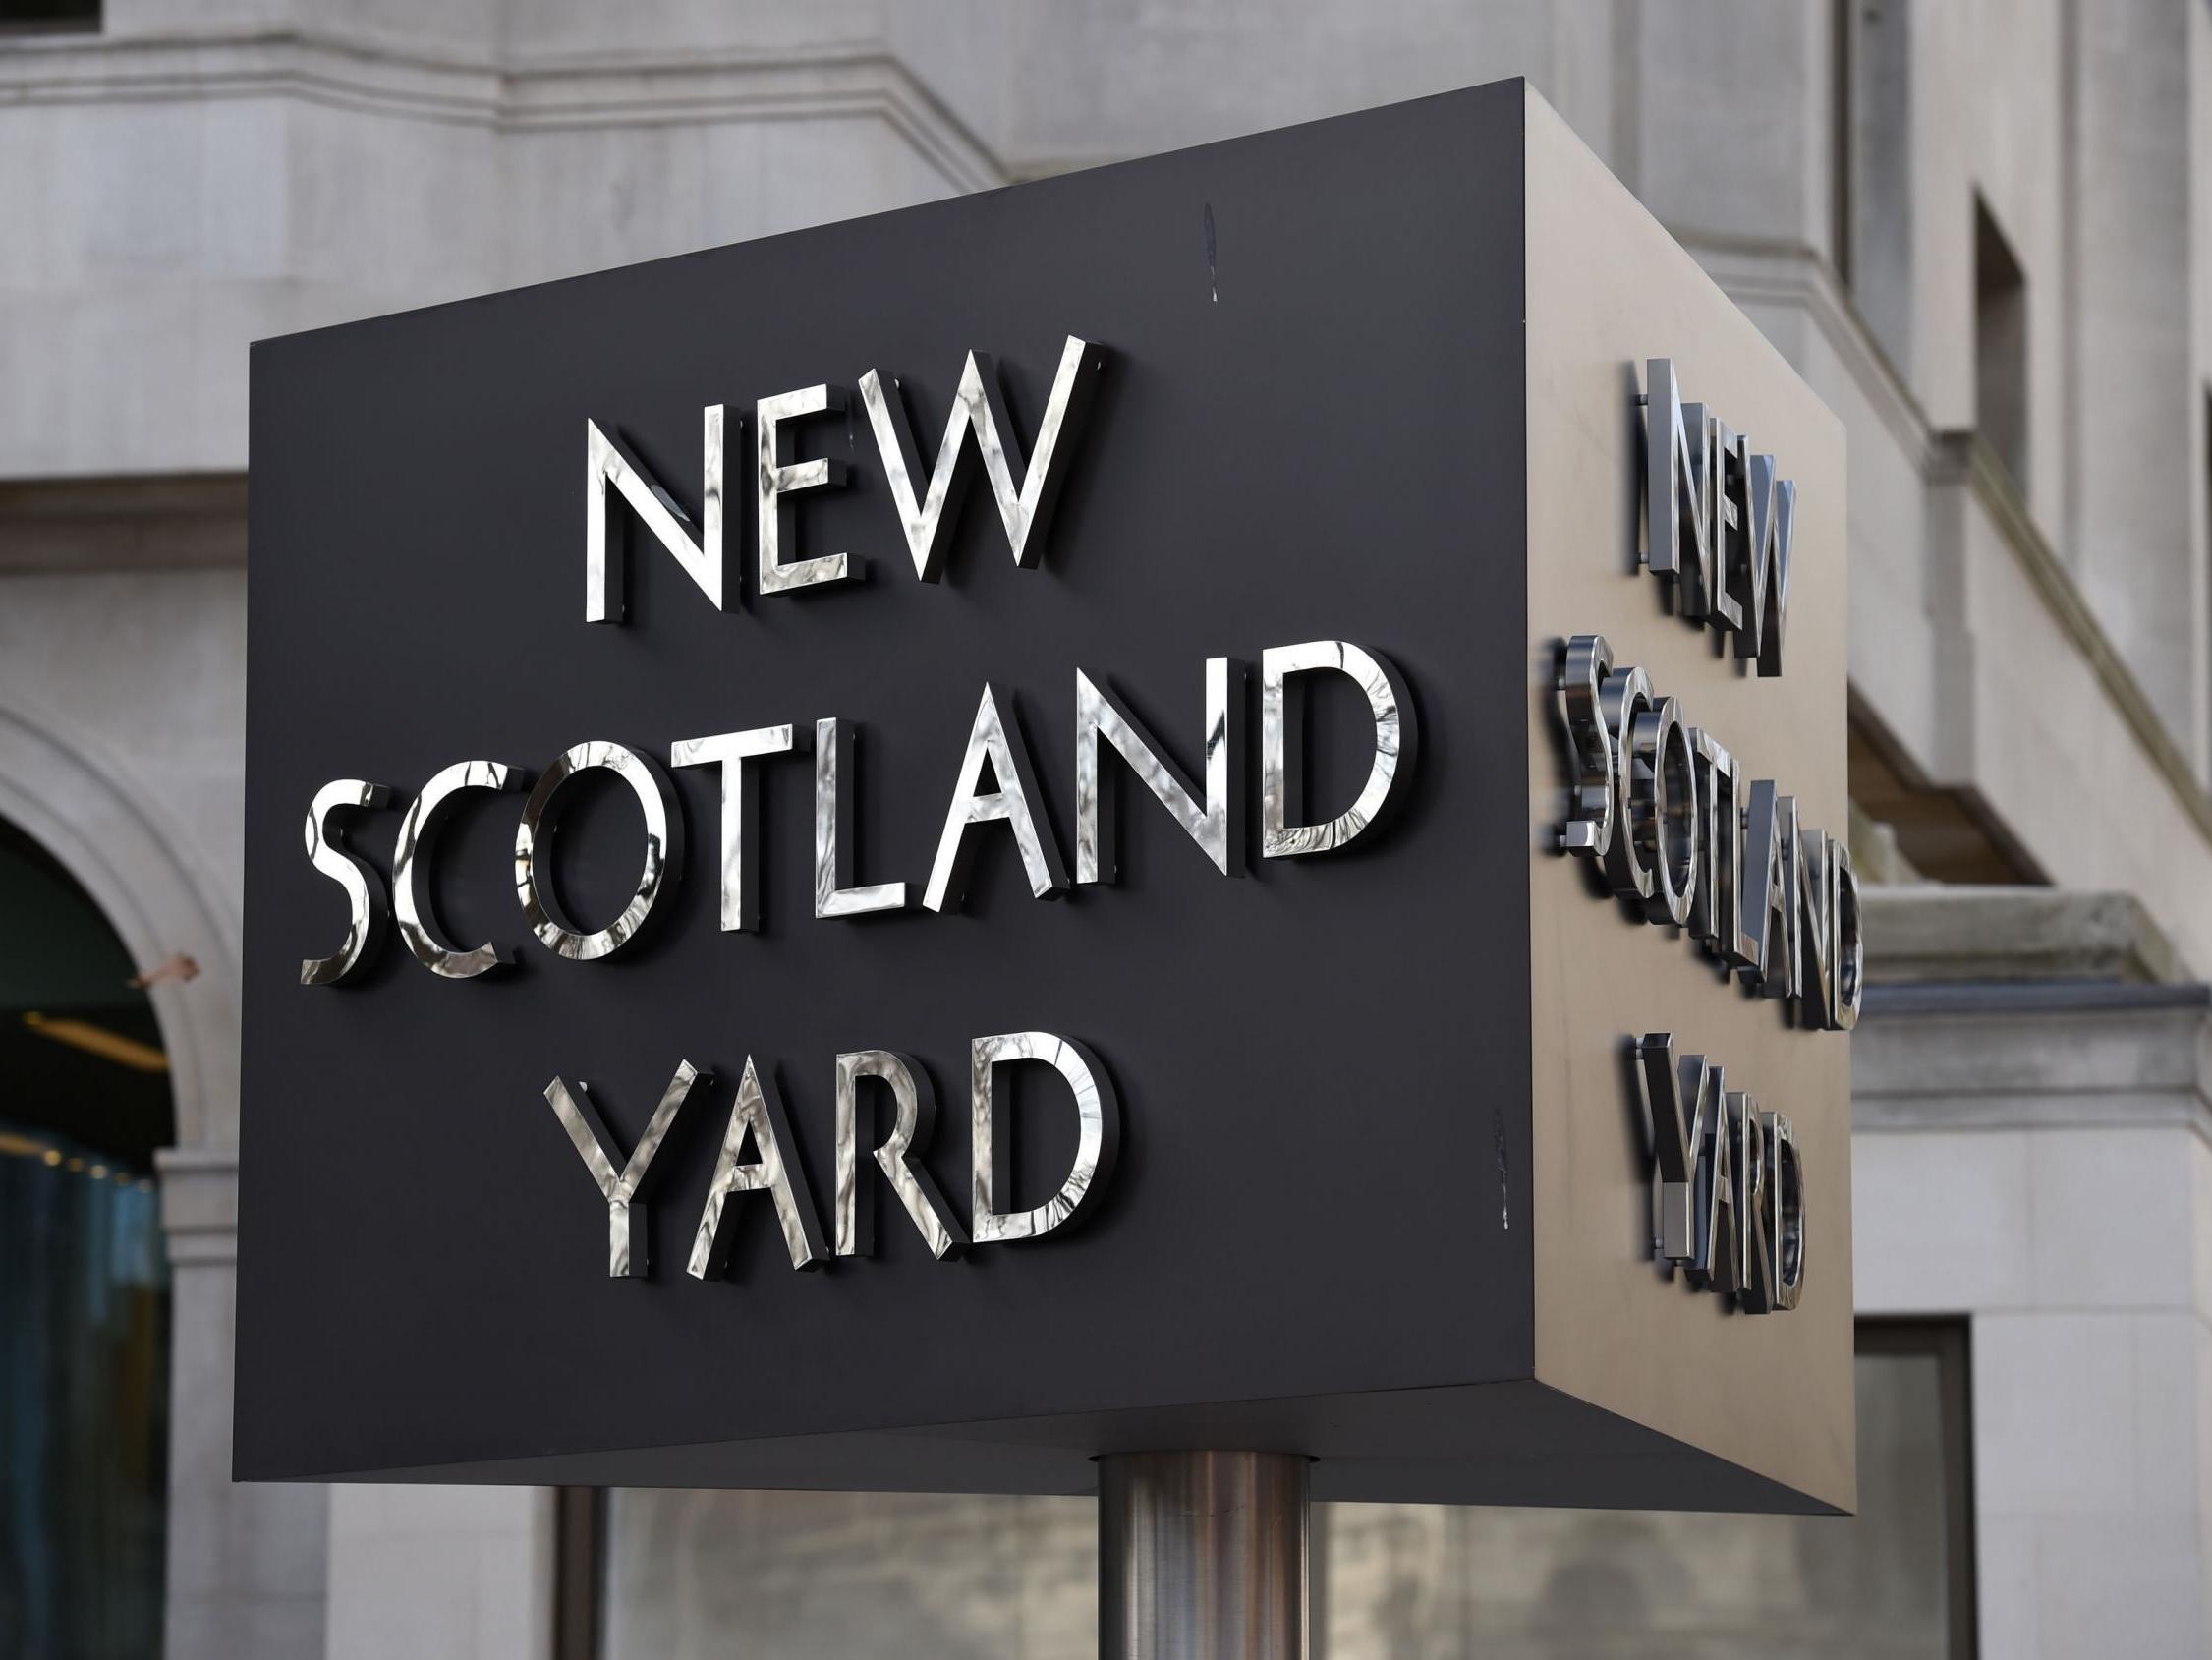 Scotland Yard has repeatedly blamed drill for contributing to a rise in knife crime